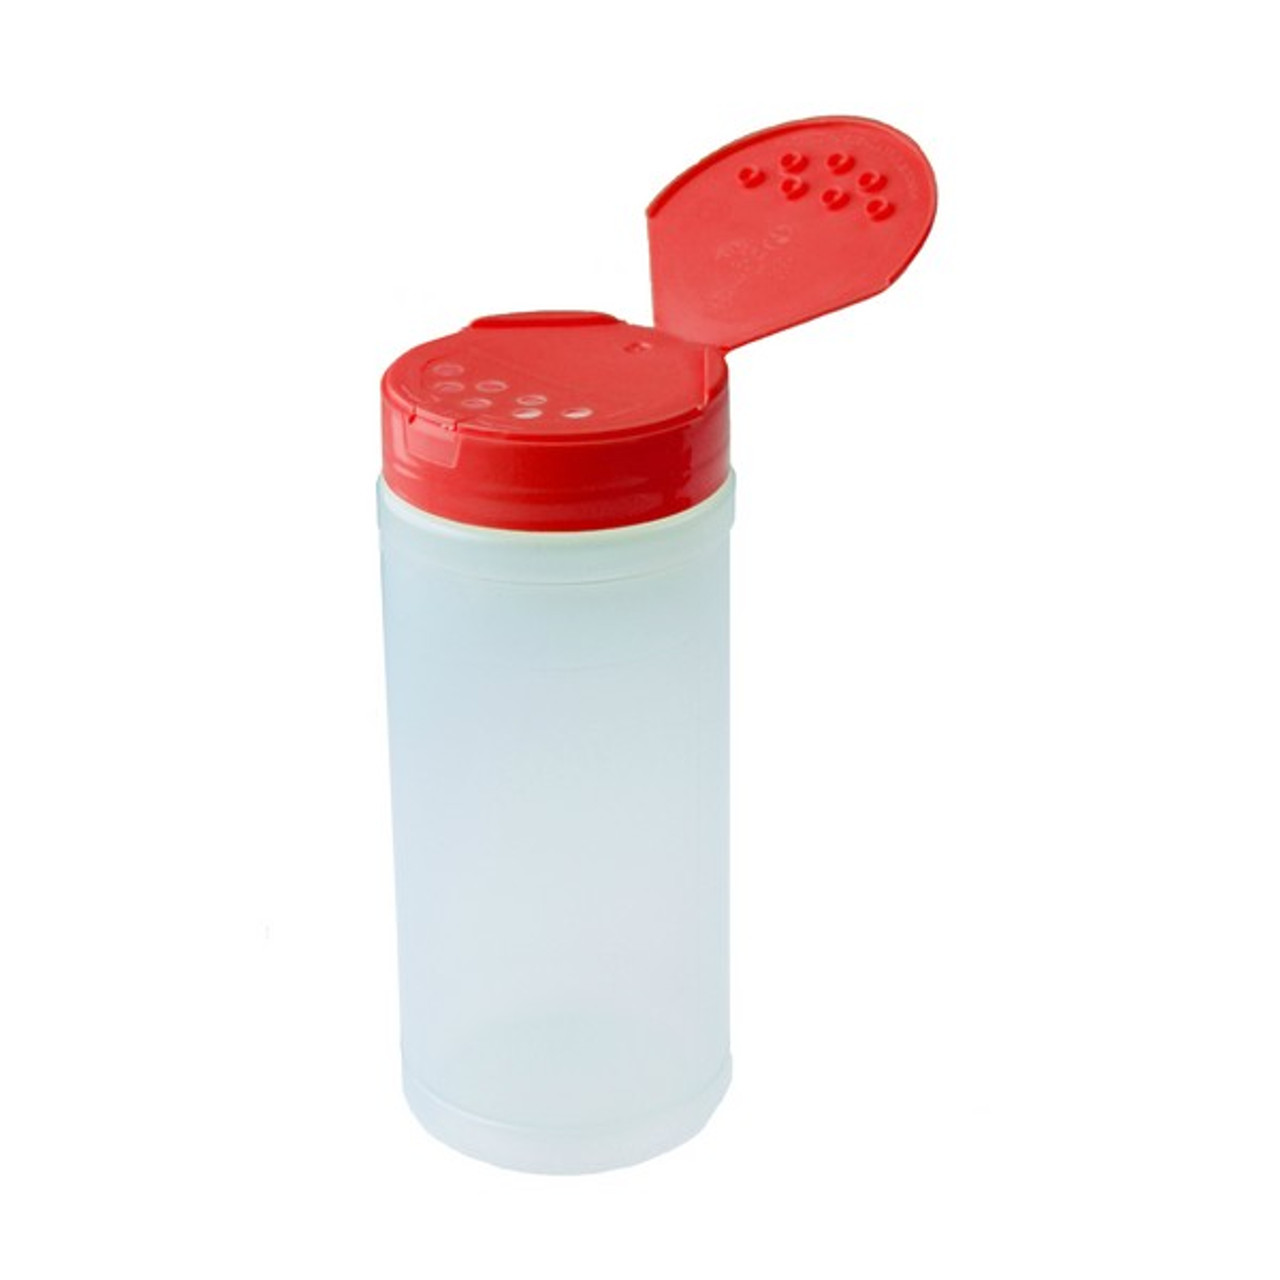 8oz Clear Pet Plastic Spice Jars (Red Spoon & Sift Cap) - Clear 53-485